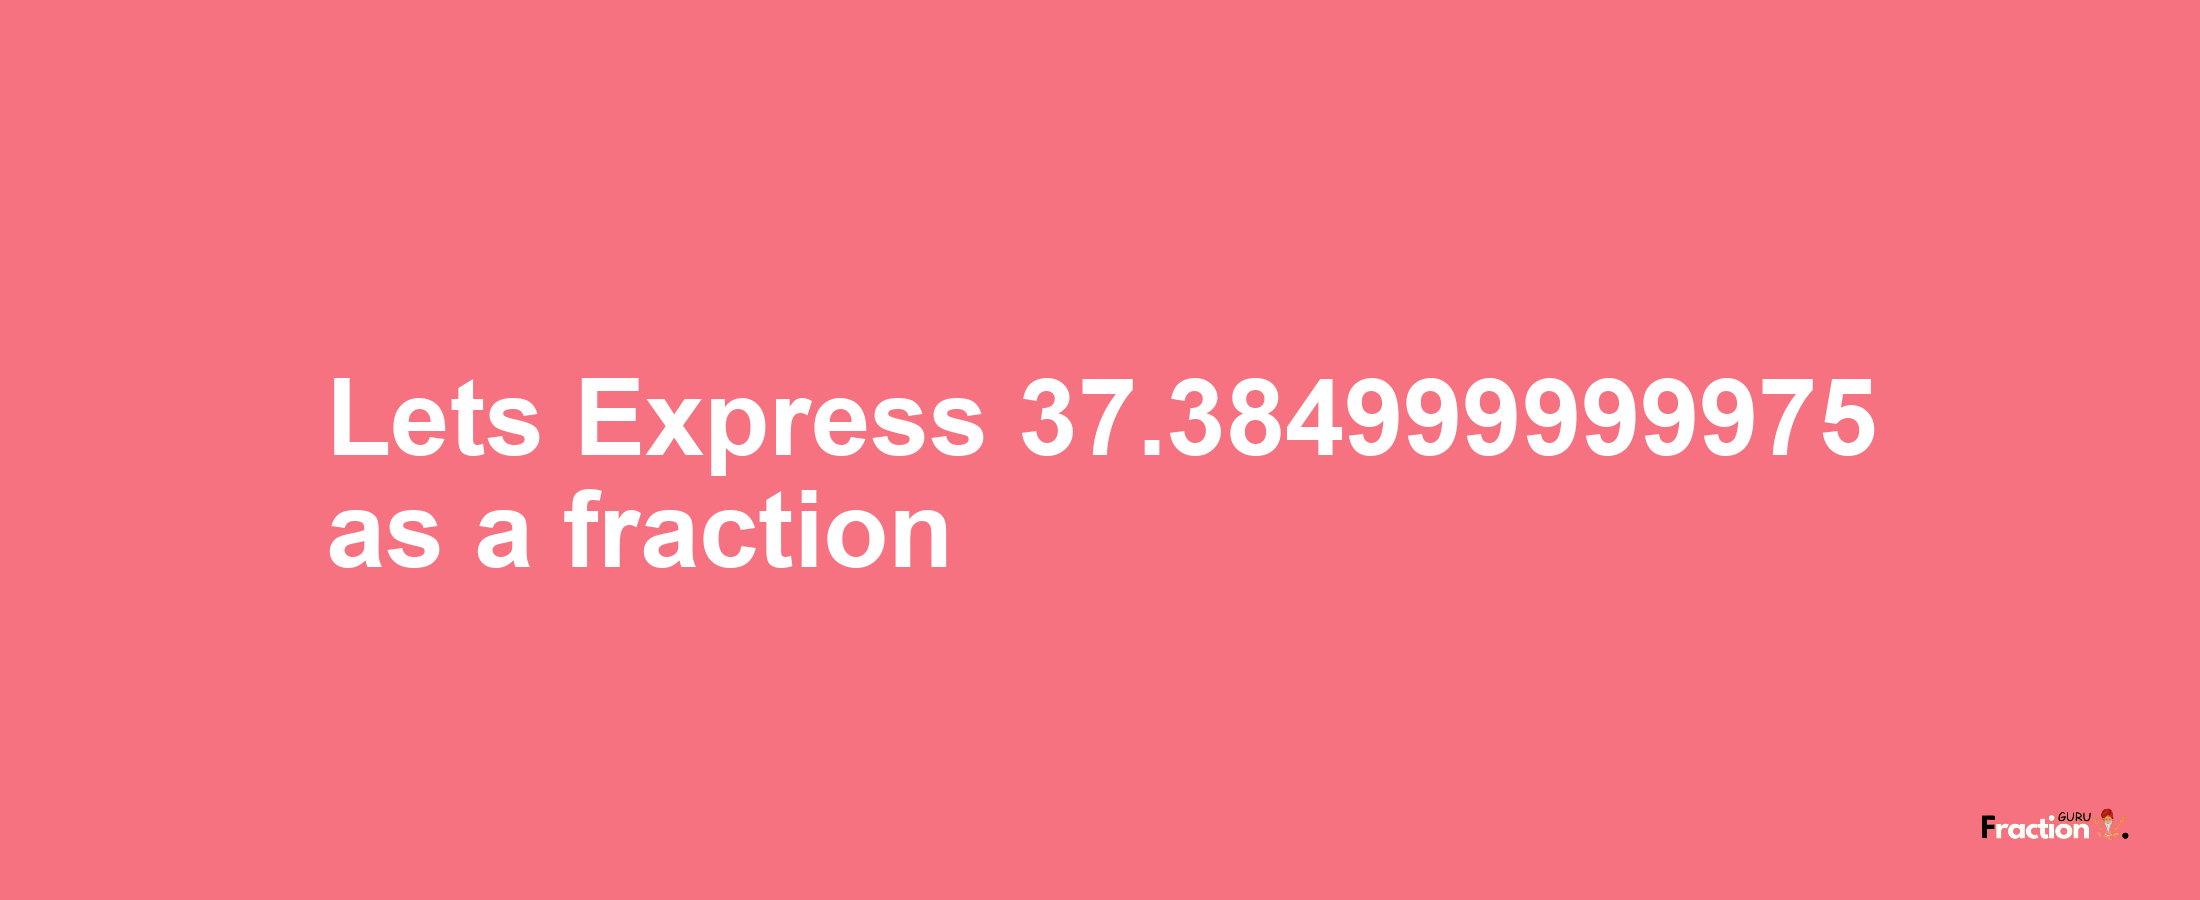 Lets Express 37.384999999975 as afraction